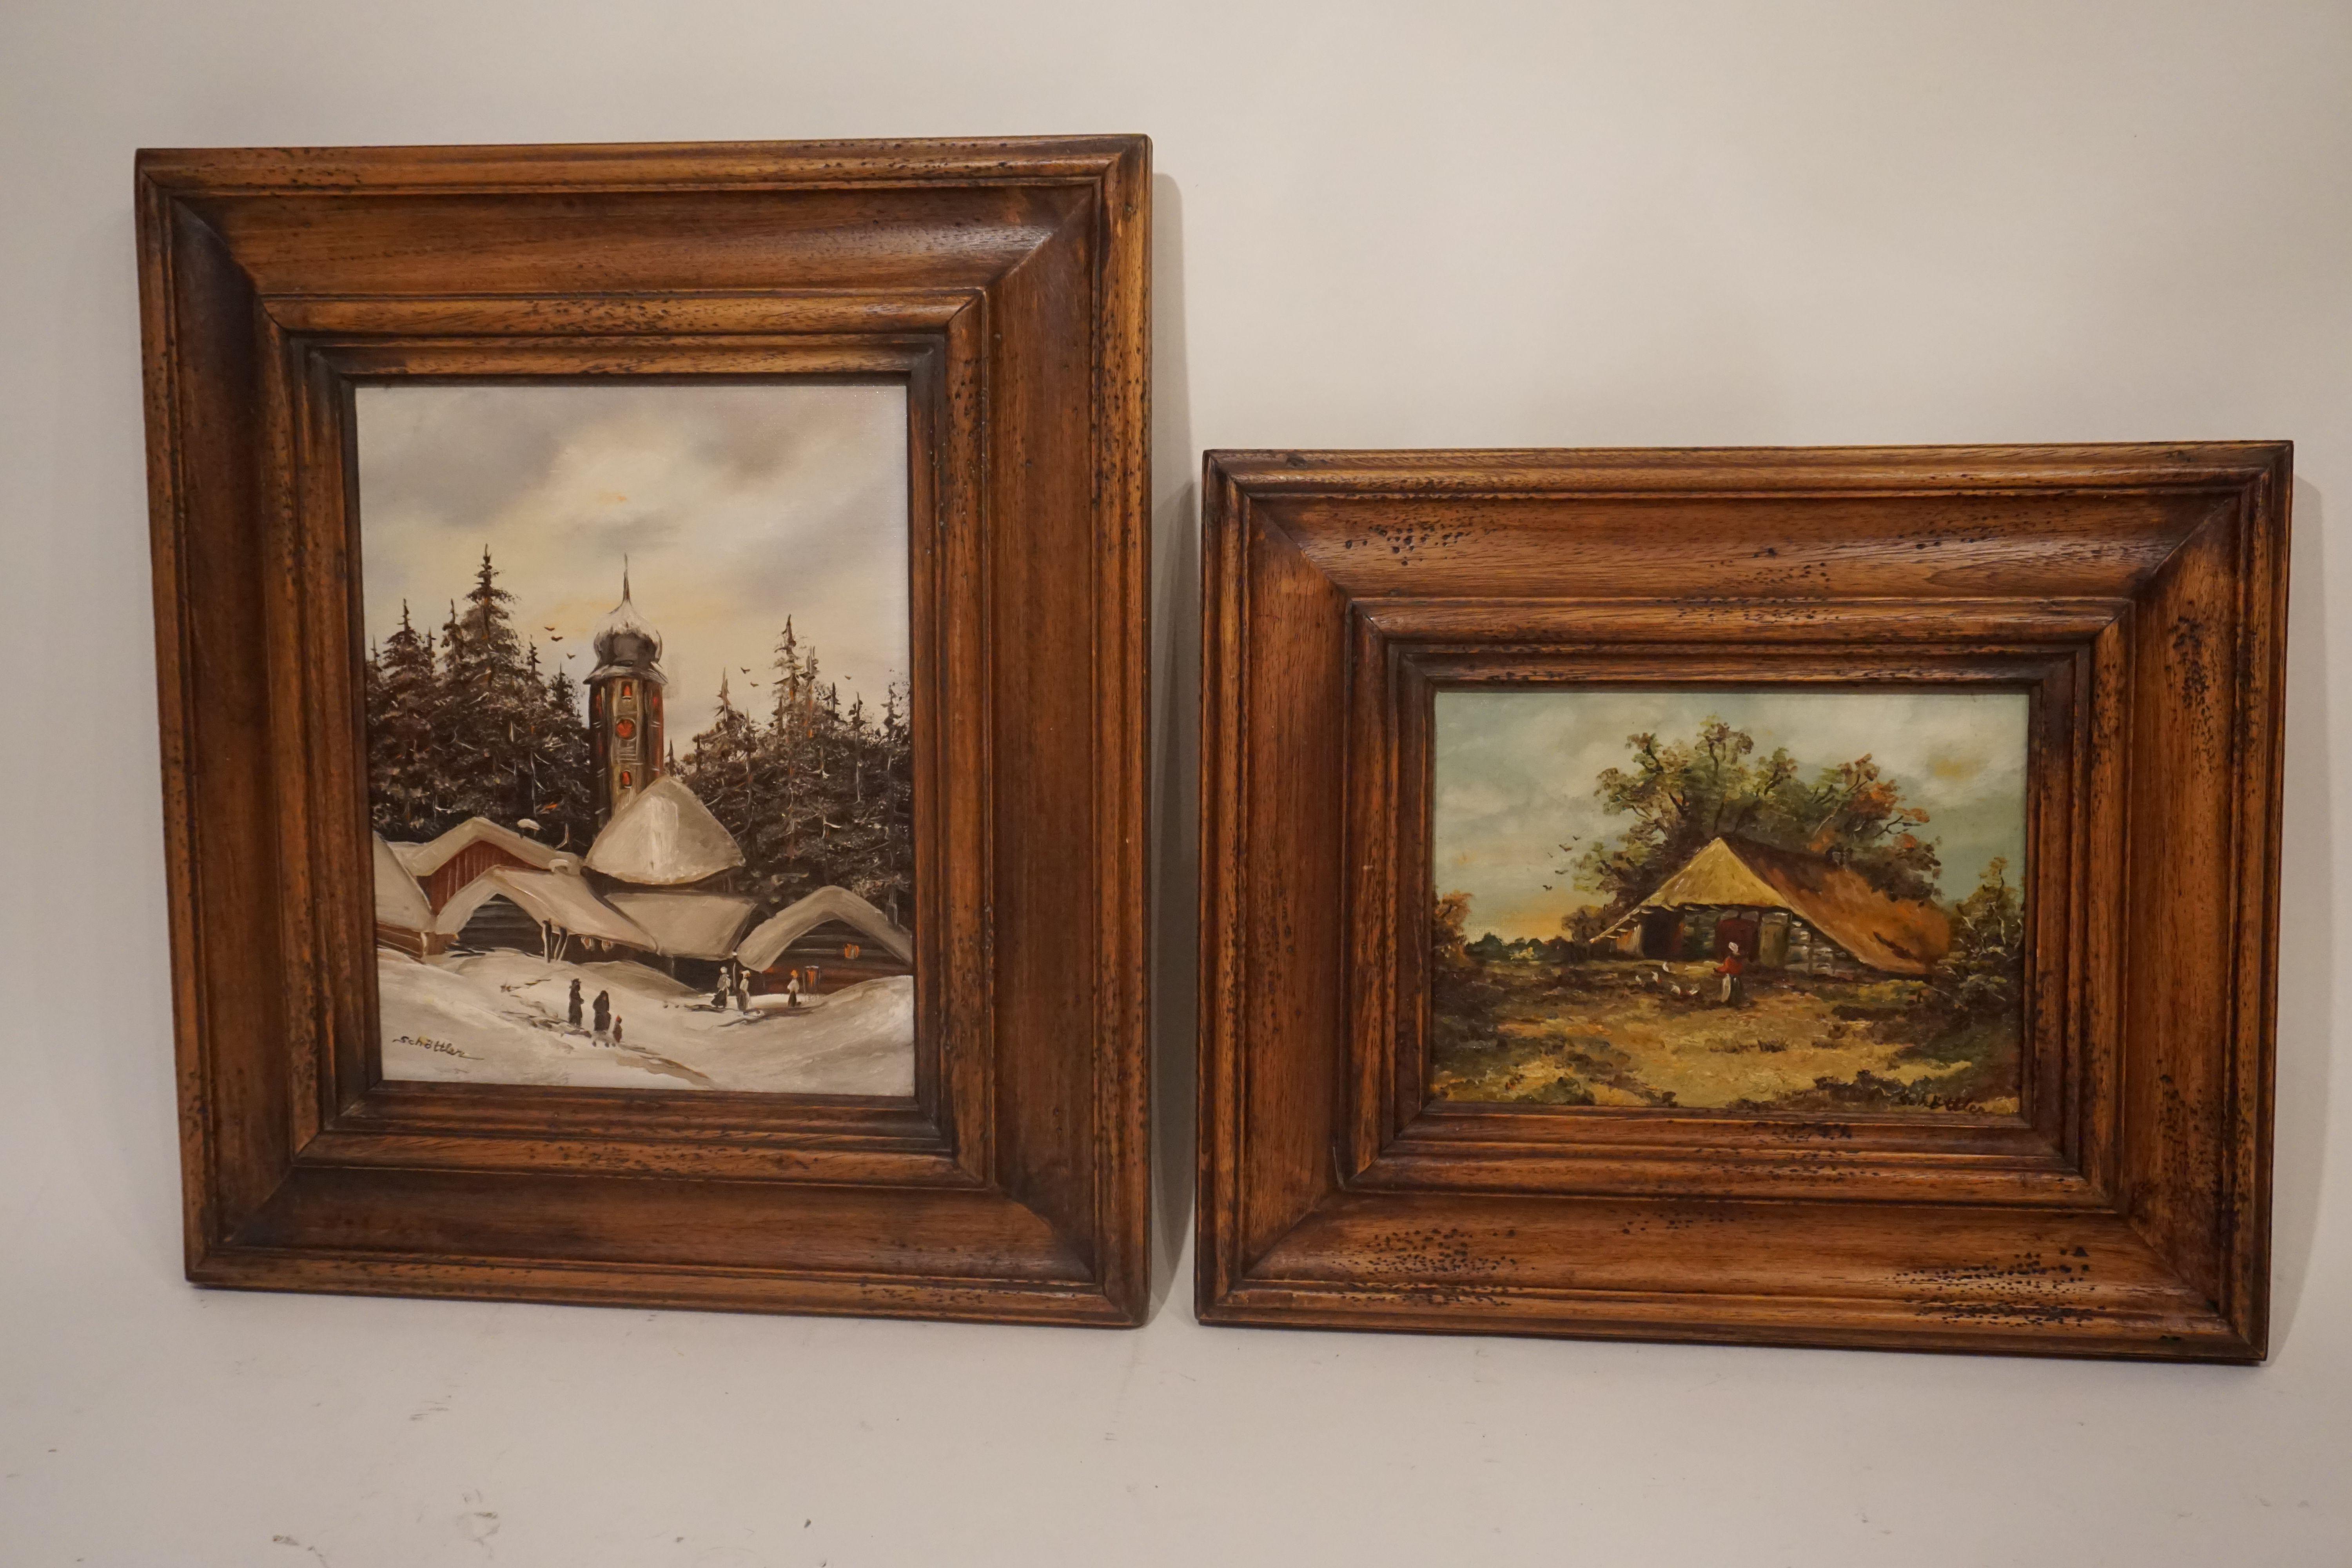 Couple pictures paintings Prof. Katharina Schöttler, 1935
Painting oil on borrowed wall in precious wood frame framed in good condition
Measures: 0.72 x 0.48 meter
0.42 x 0.36 meter.